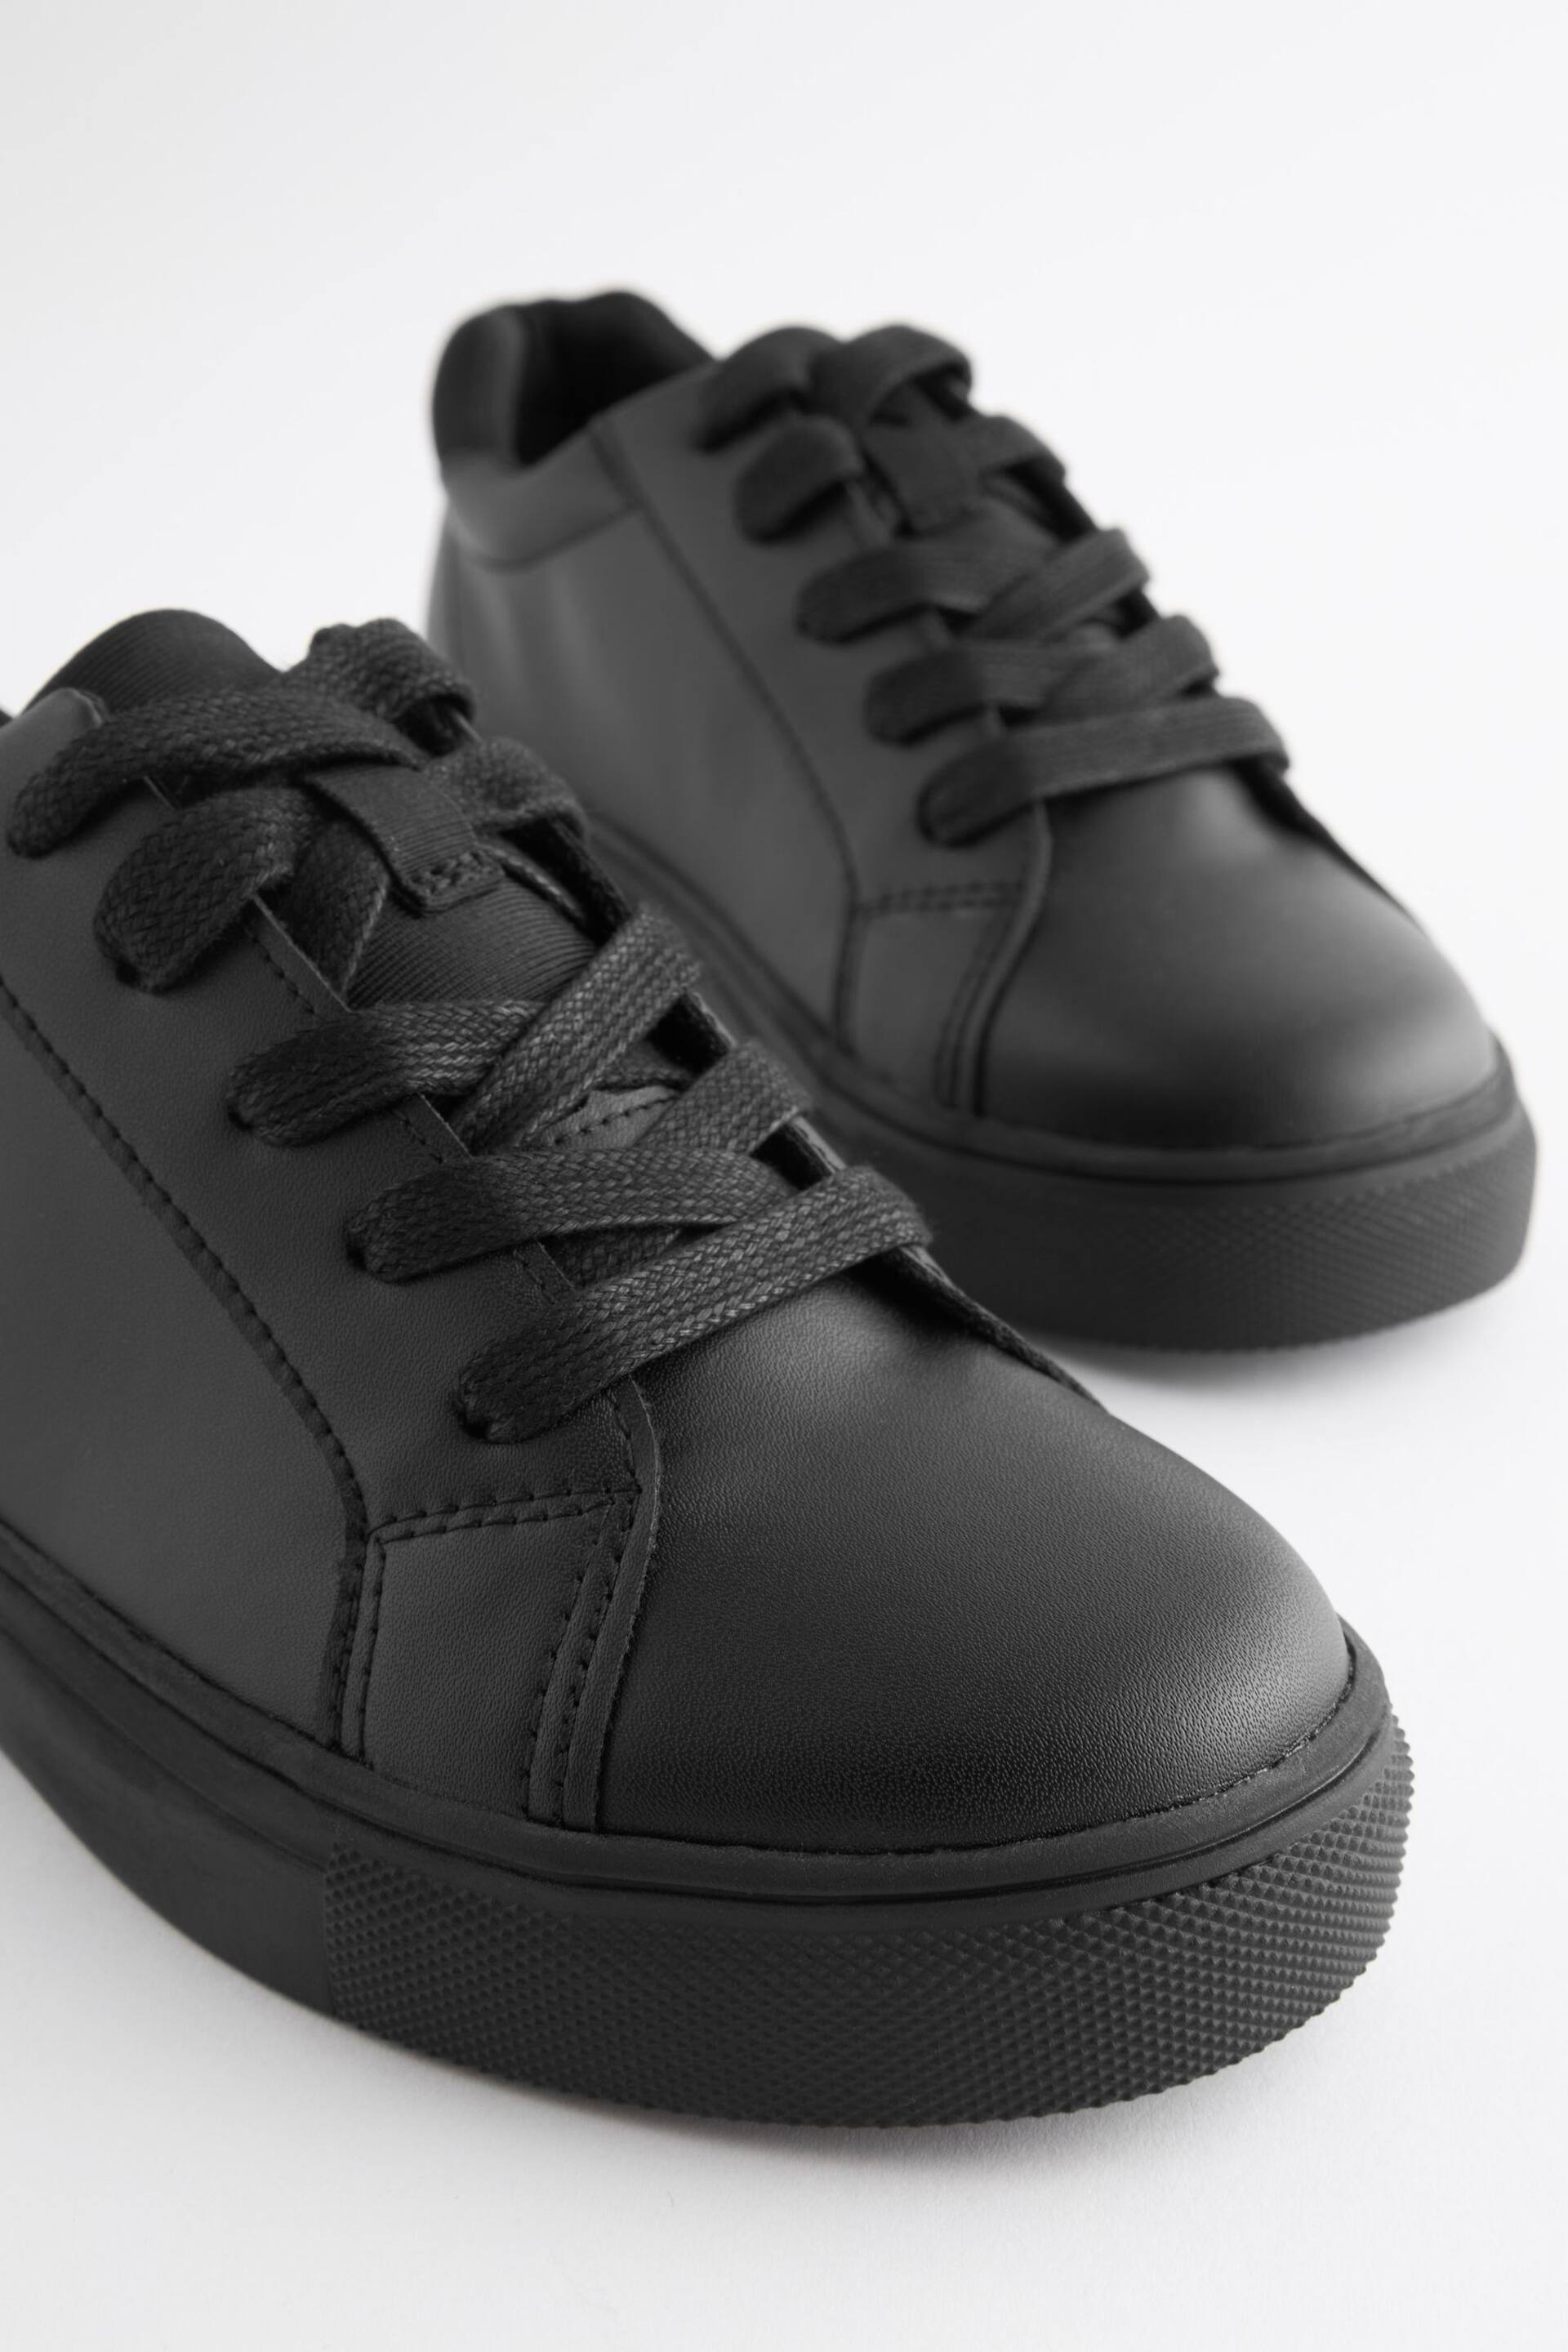 Black Standard Fit (F) Lace Up School Shoes - Image 4 of 5